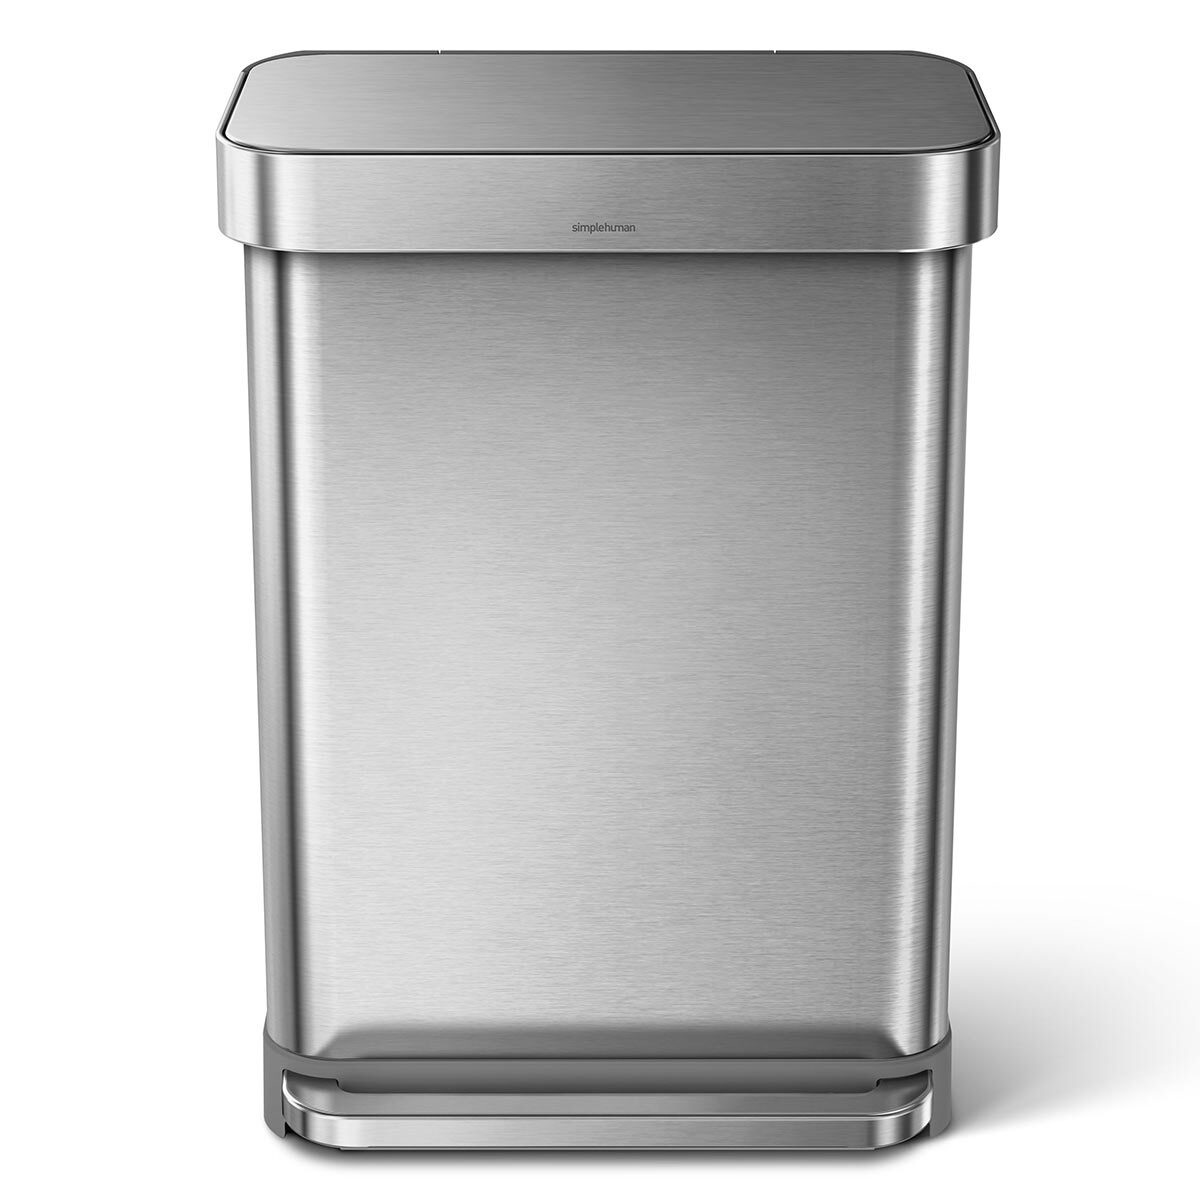 Cut out image of larger bin on white background